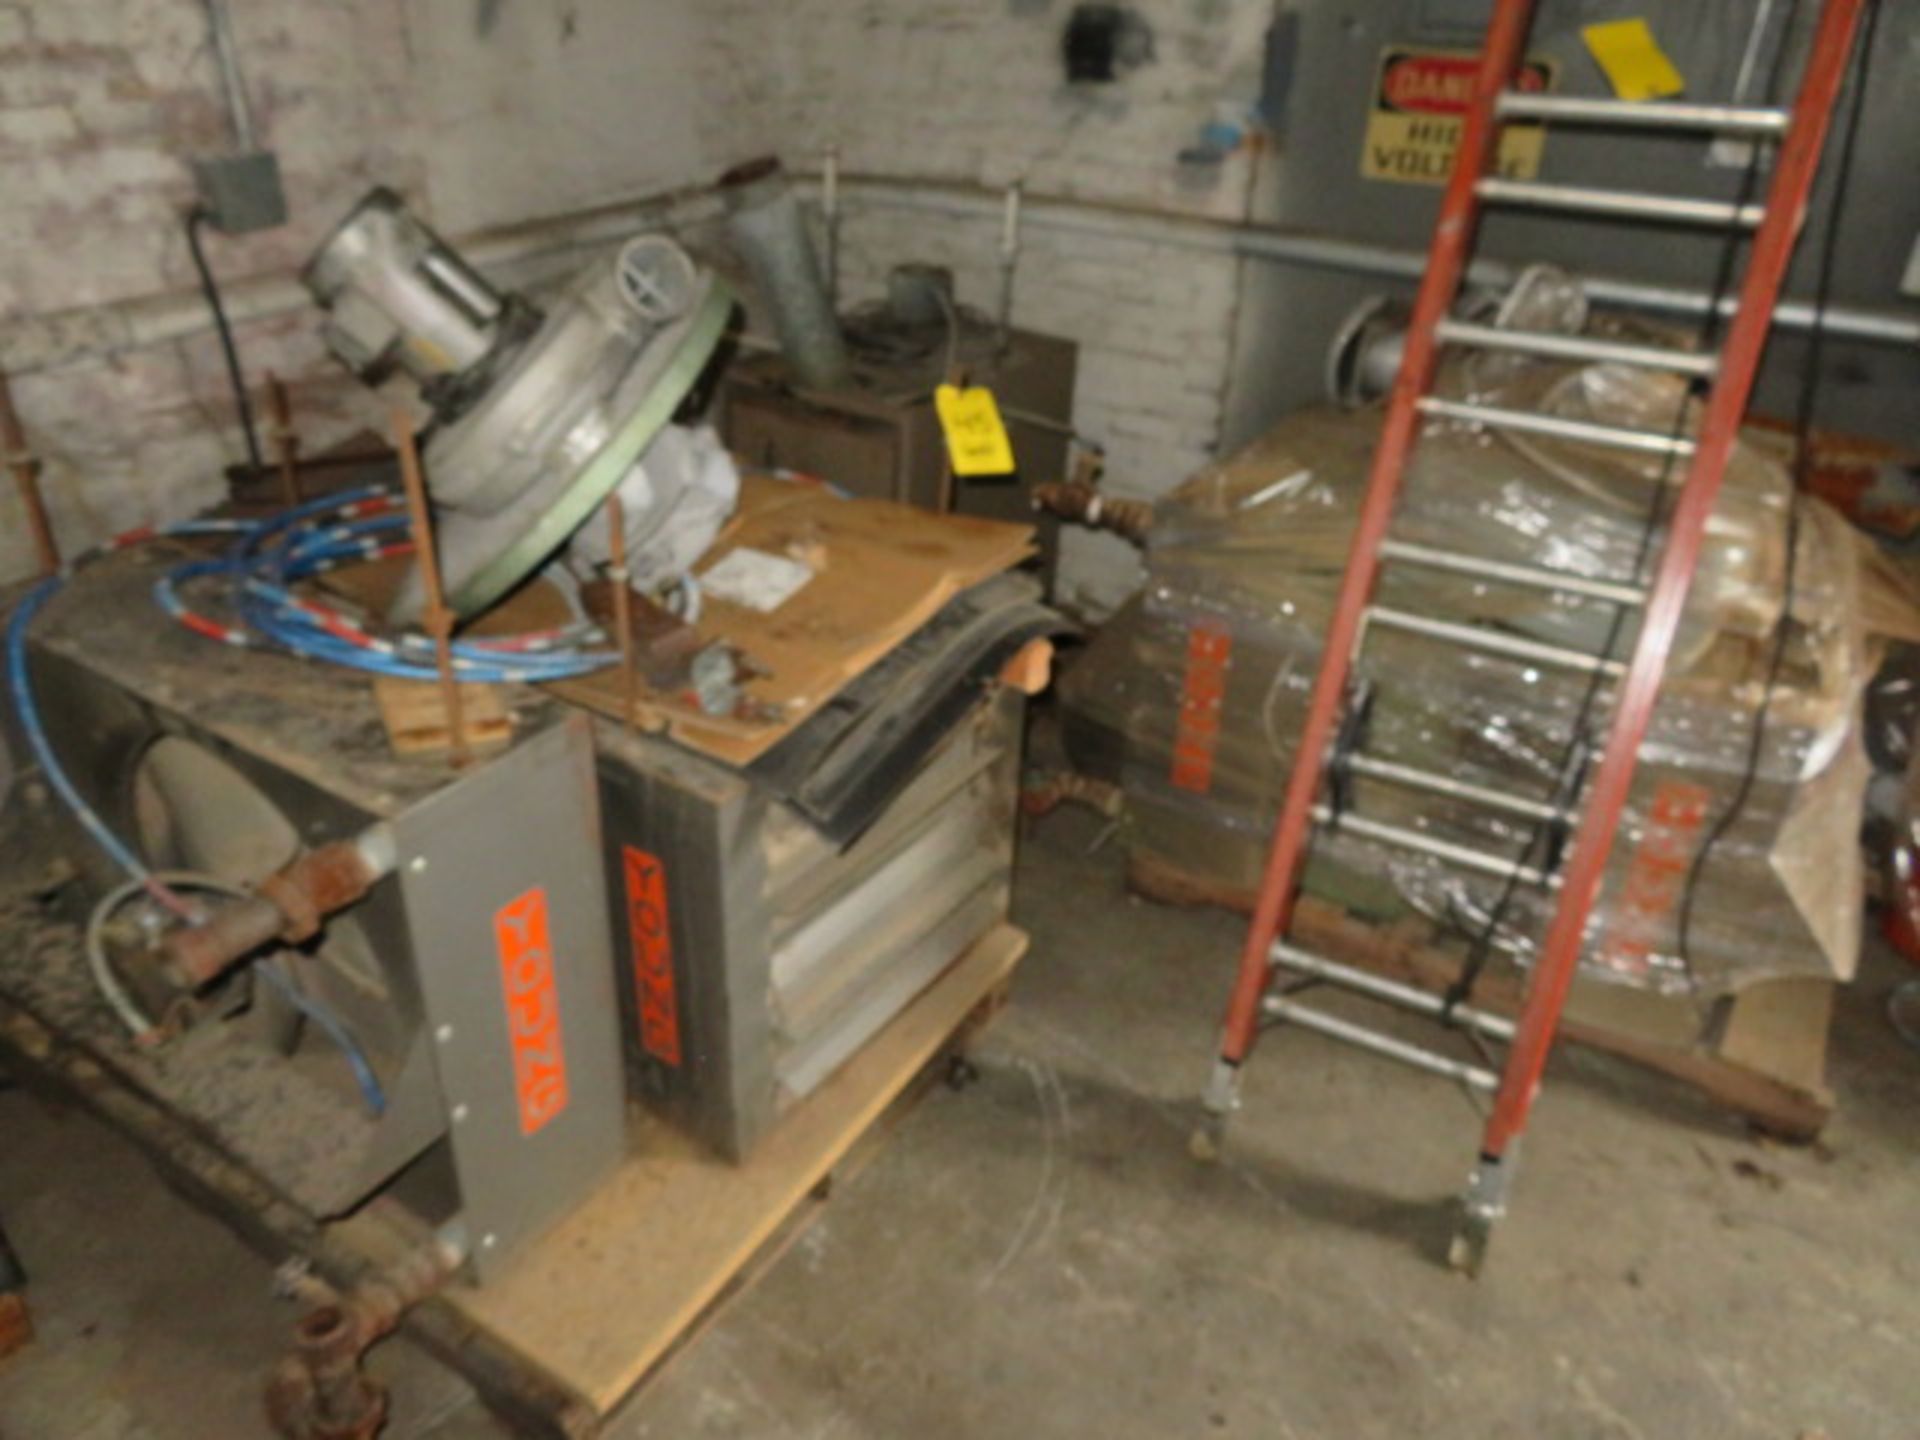 (3) SKIDS OF ASSORTED STEAM AND GAS HEATERS (DOES NOT INCLUDE DUST COLLECTOR SHOWN IN PHOTO)